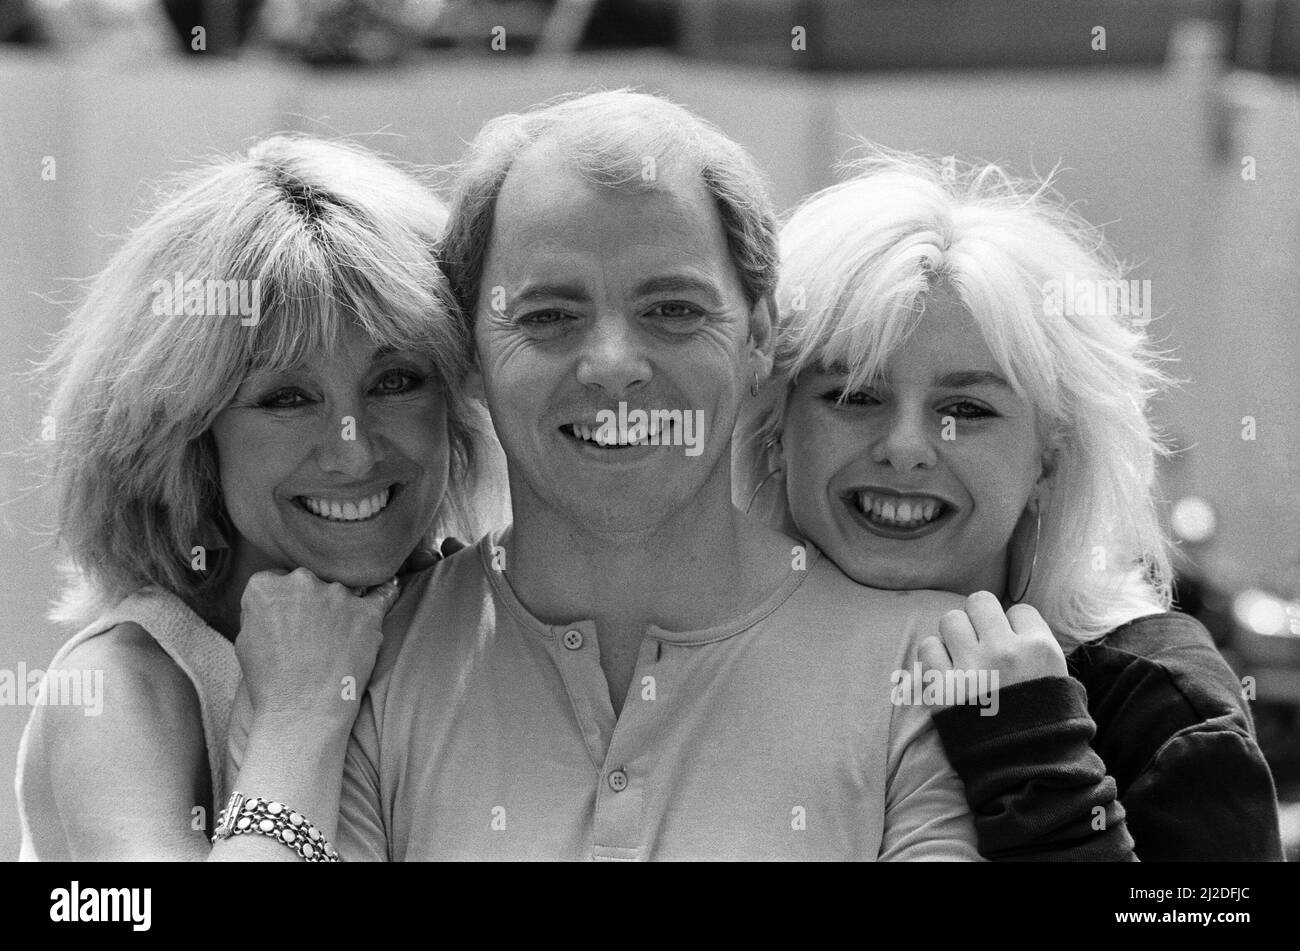 Scottish singer Jim Diamond pictured with some of his backing group, Vicki and Sam Brown, wife and daughter of Joe Brown. Pictured, left to right, Vicki Brown, Jim Diamond and Sam Brown. 16th May 1985. Stock Photo